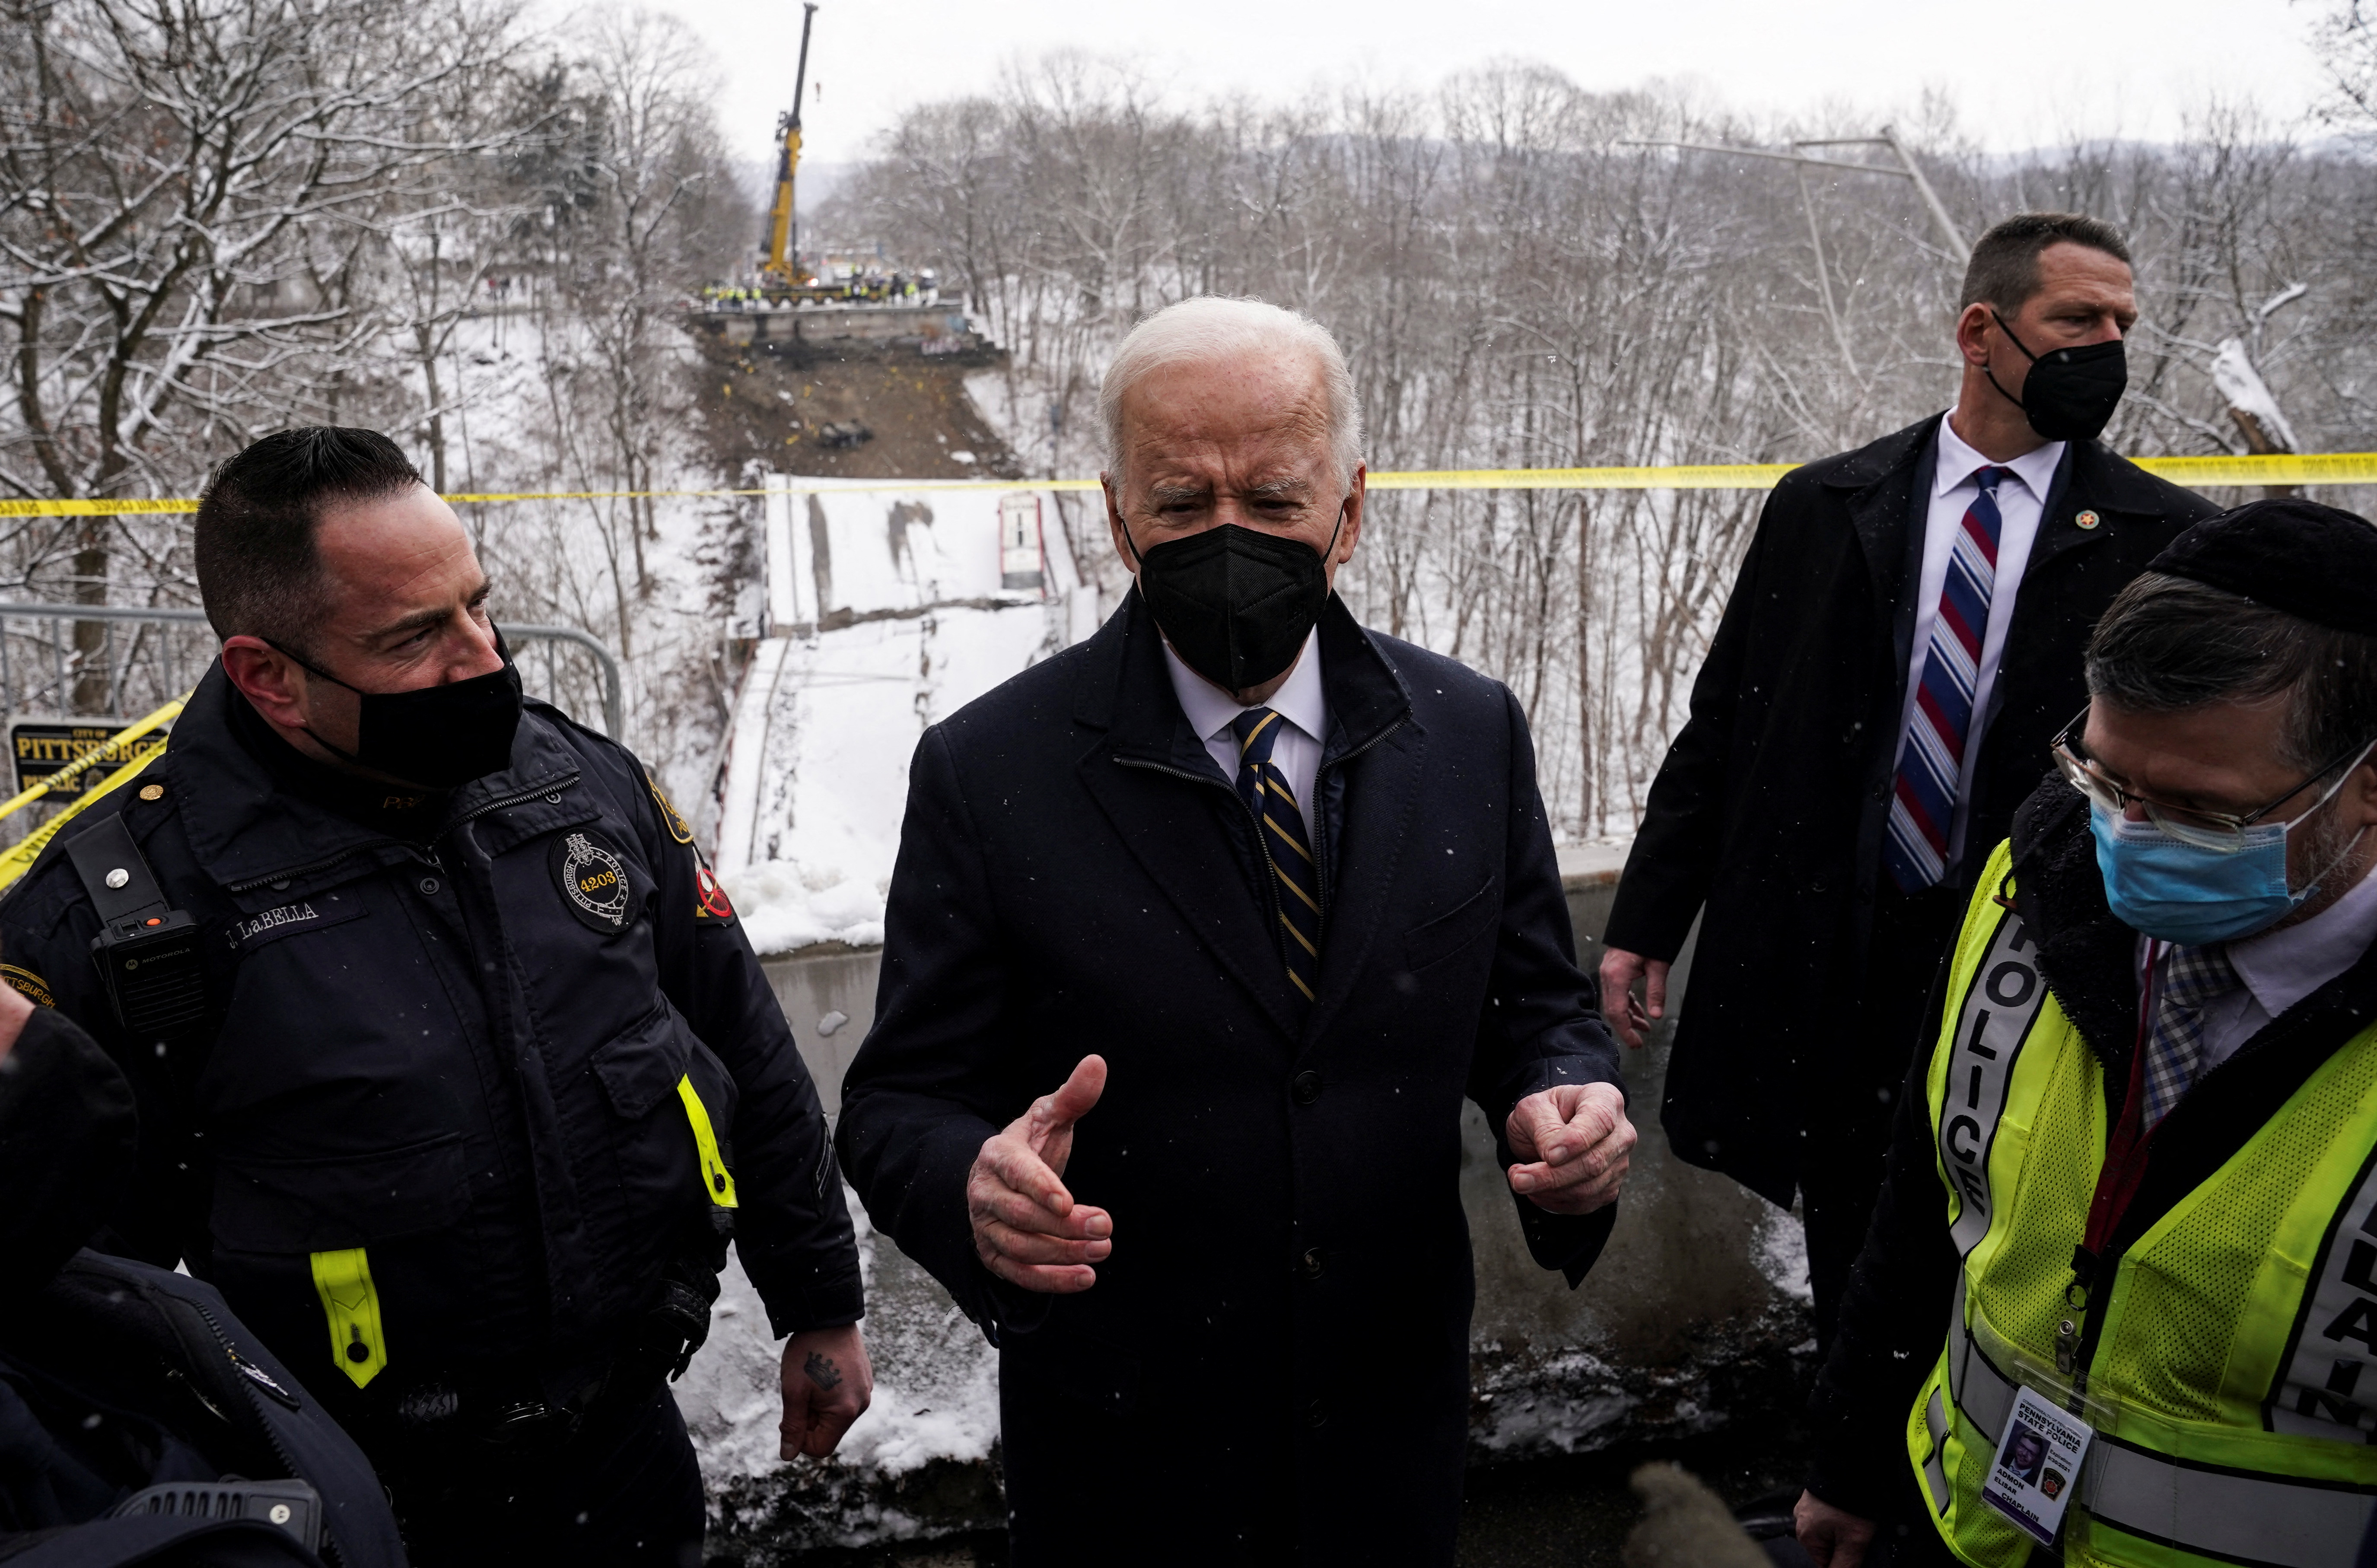 U.S. President Joe Biden speaks to reporters and first responders as he visits the site of a bridge collapse prior to attending an earlier scheduled event in Pittsburgh, Pennsylvania, U.S., January 28, 2022. REUTERS/Kevin Lamarque